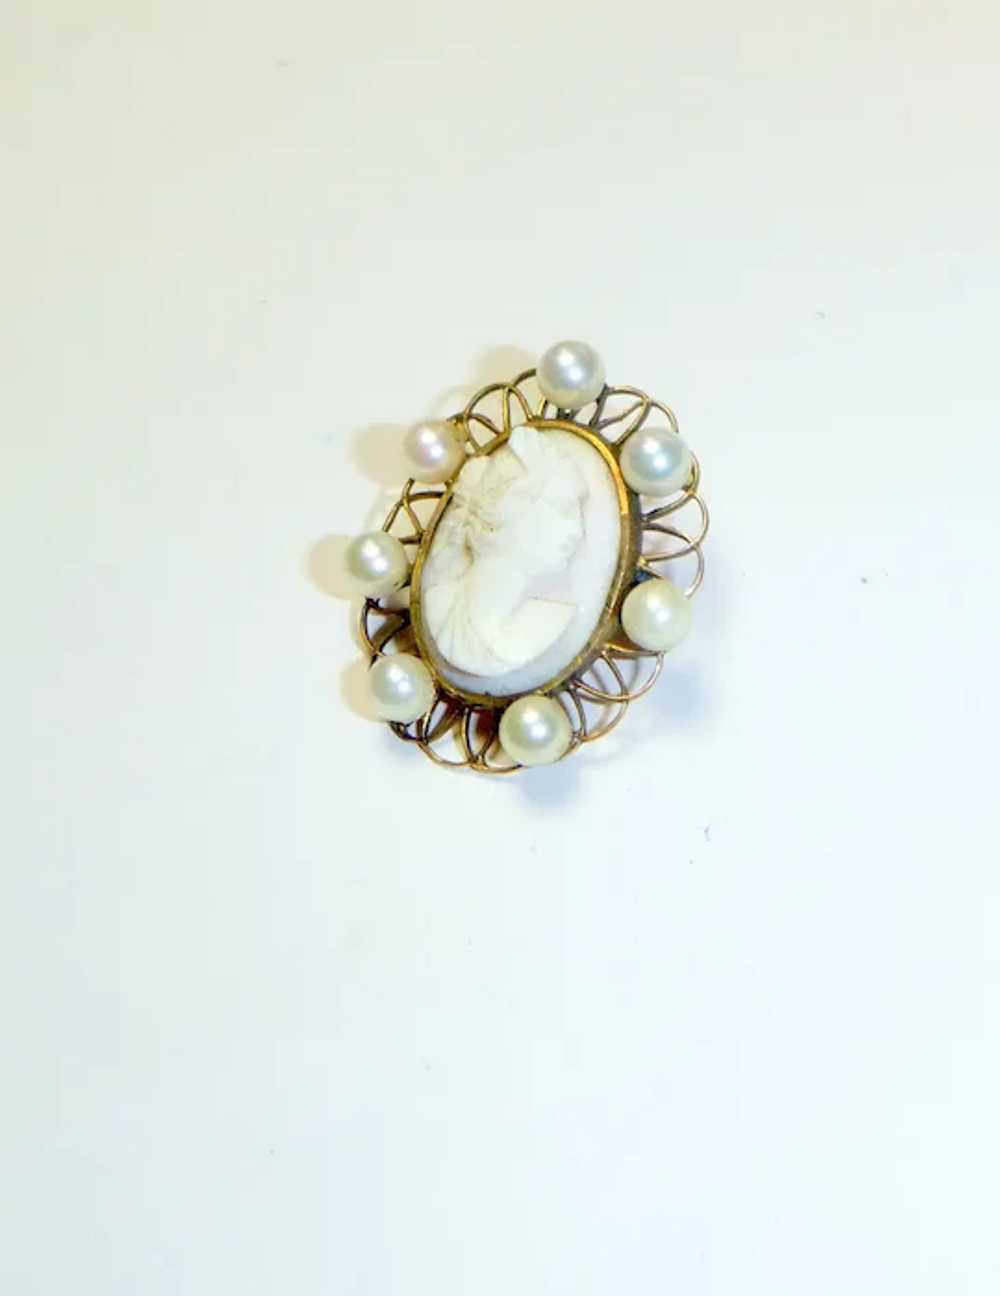 Vintage Conch Shell & Cultured Pearl Cameo Brooch - image 2